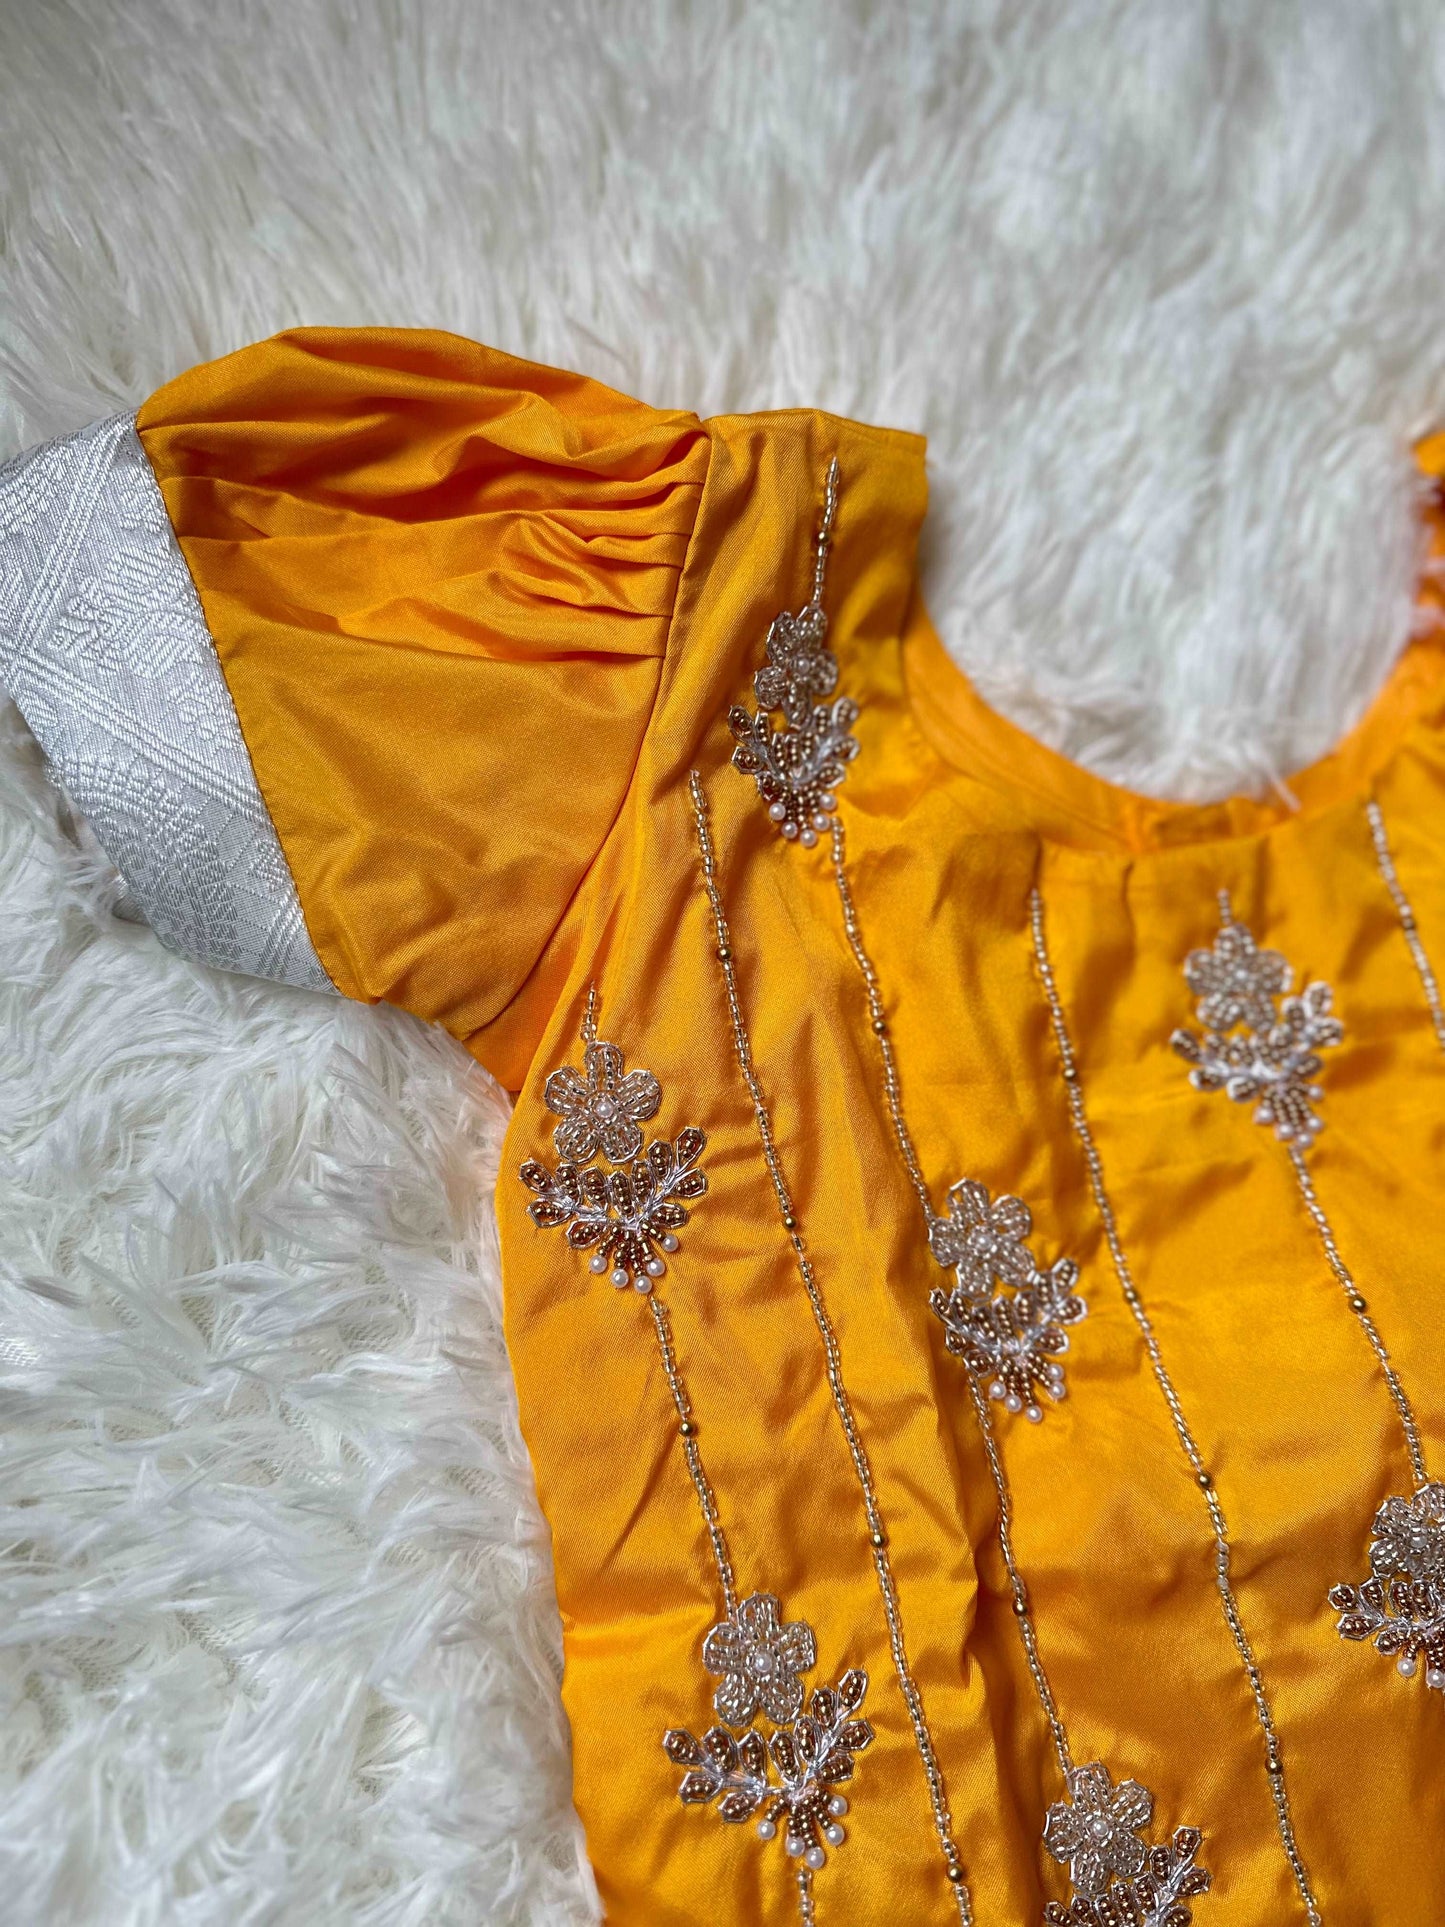 ** PRE ORDER** Radiant Elegance: Silver and Yellow Peplum Top with Aari Work - Kalas Couture